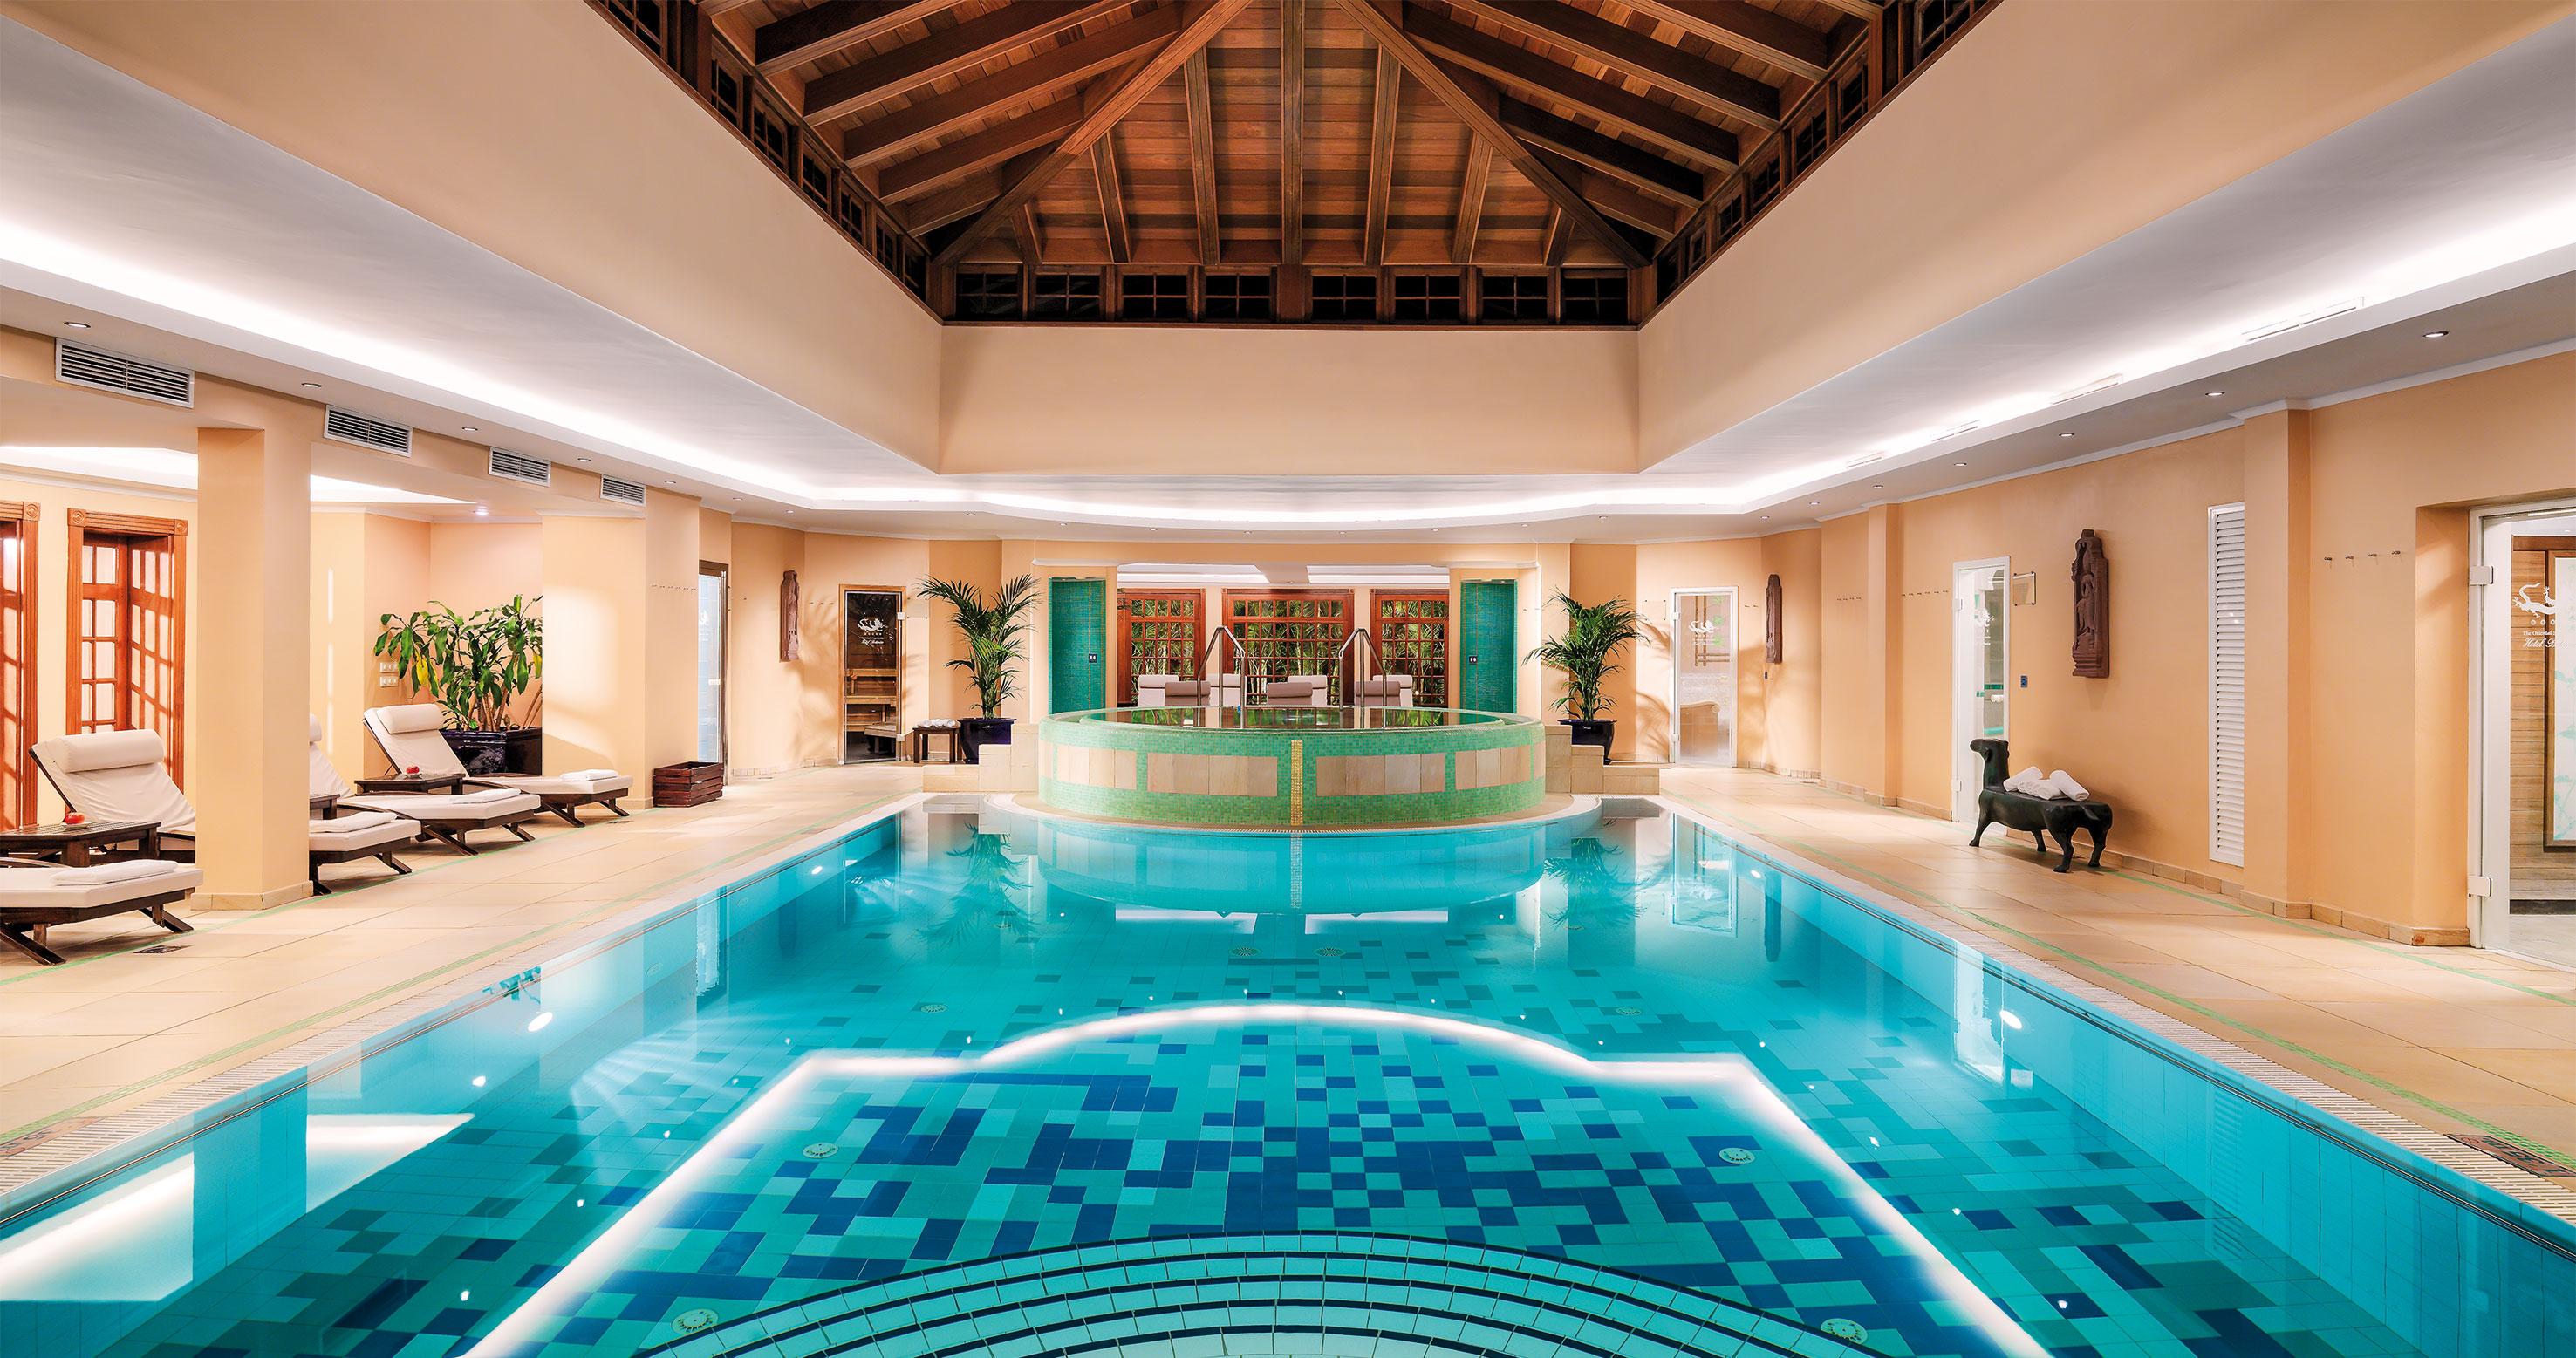 Top 10 Luxury Hotels with a Swimming Pool and Spa in Spain